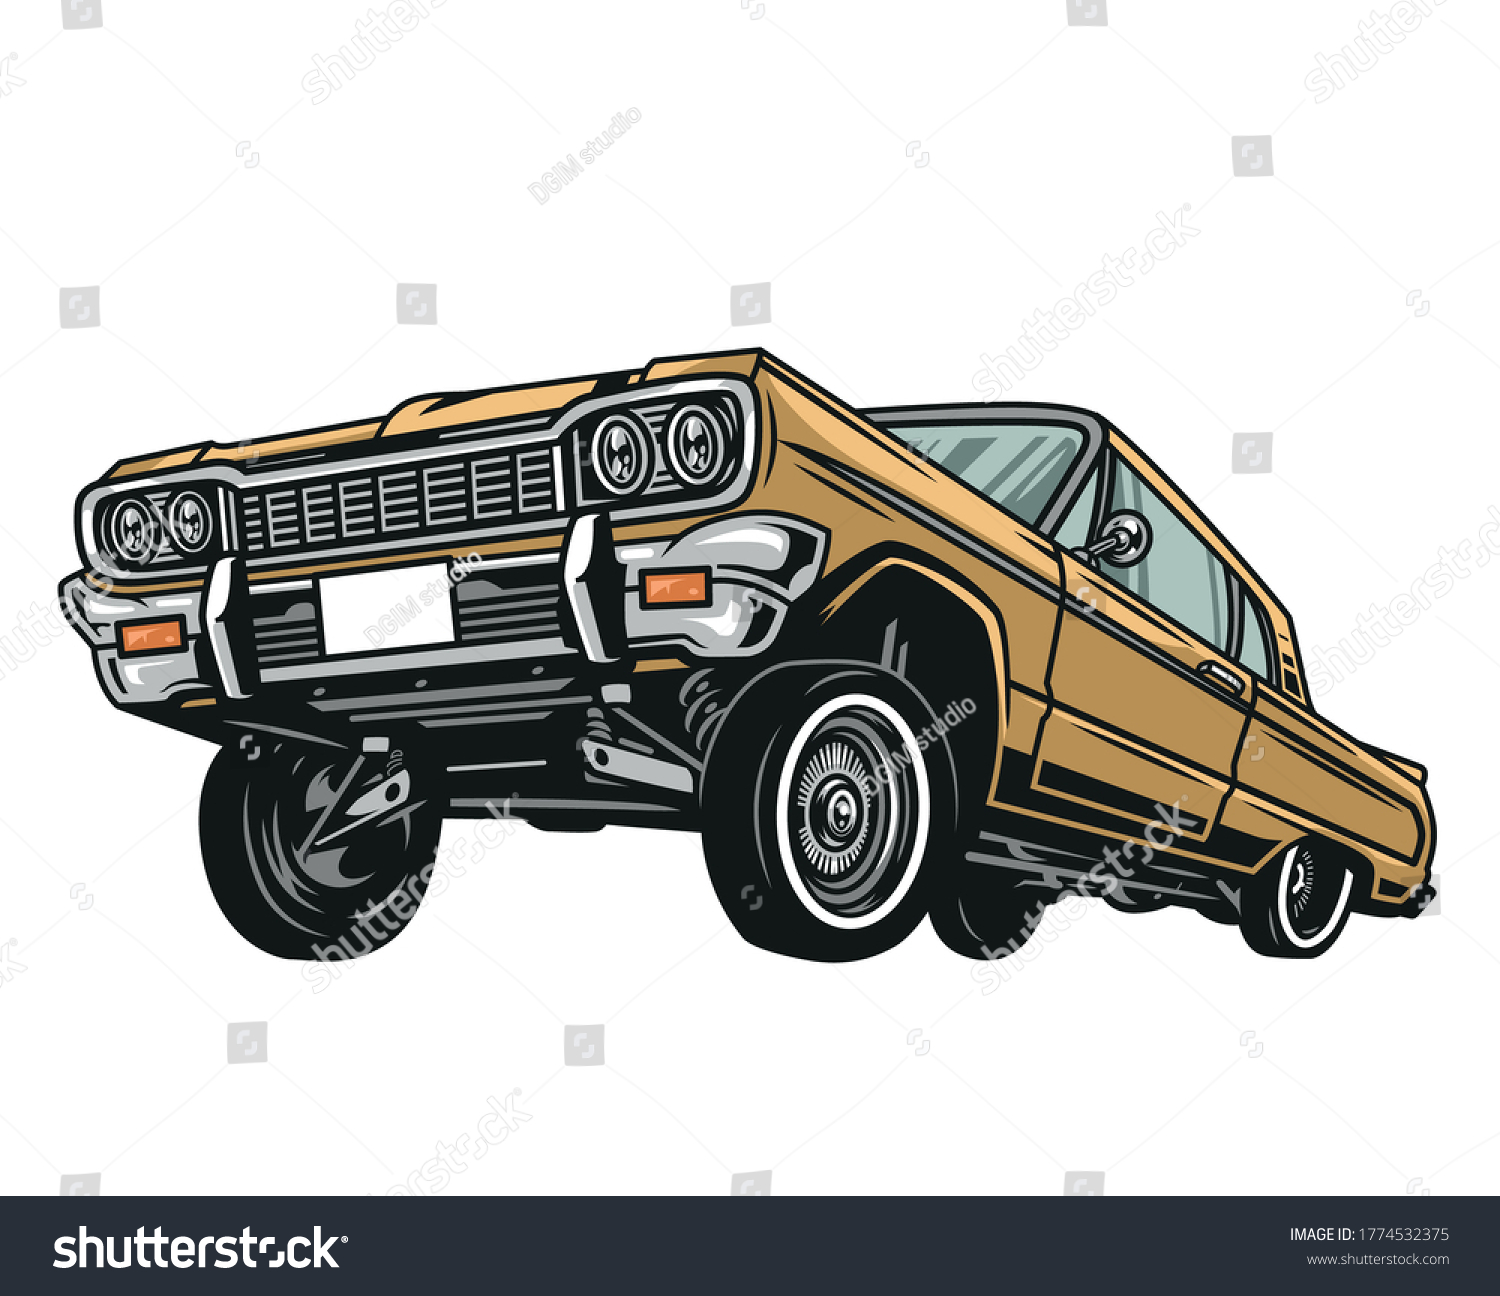 SVG of Colorful low rider retro car concept in vintage style isolated vector illustration svg